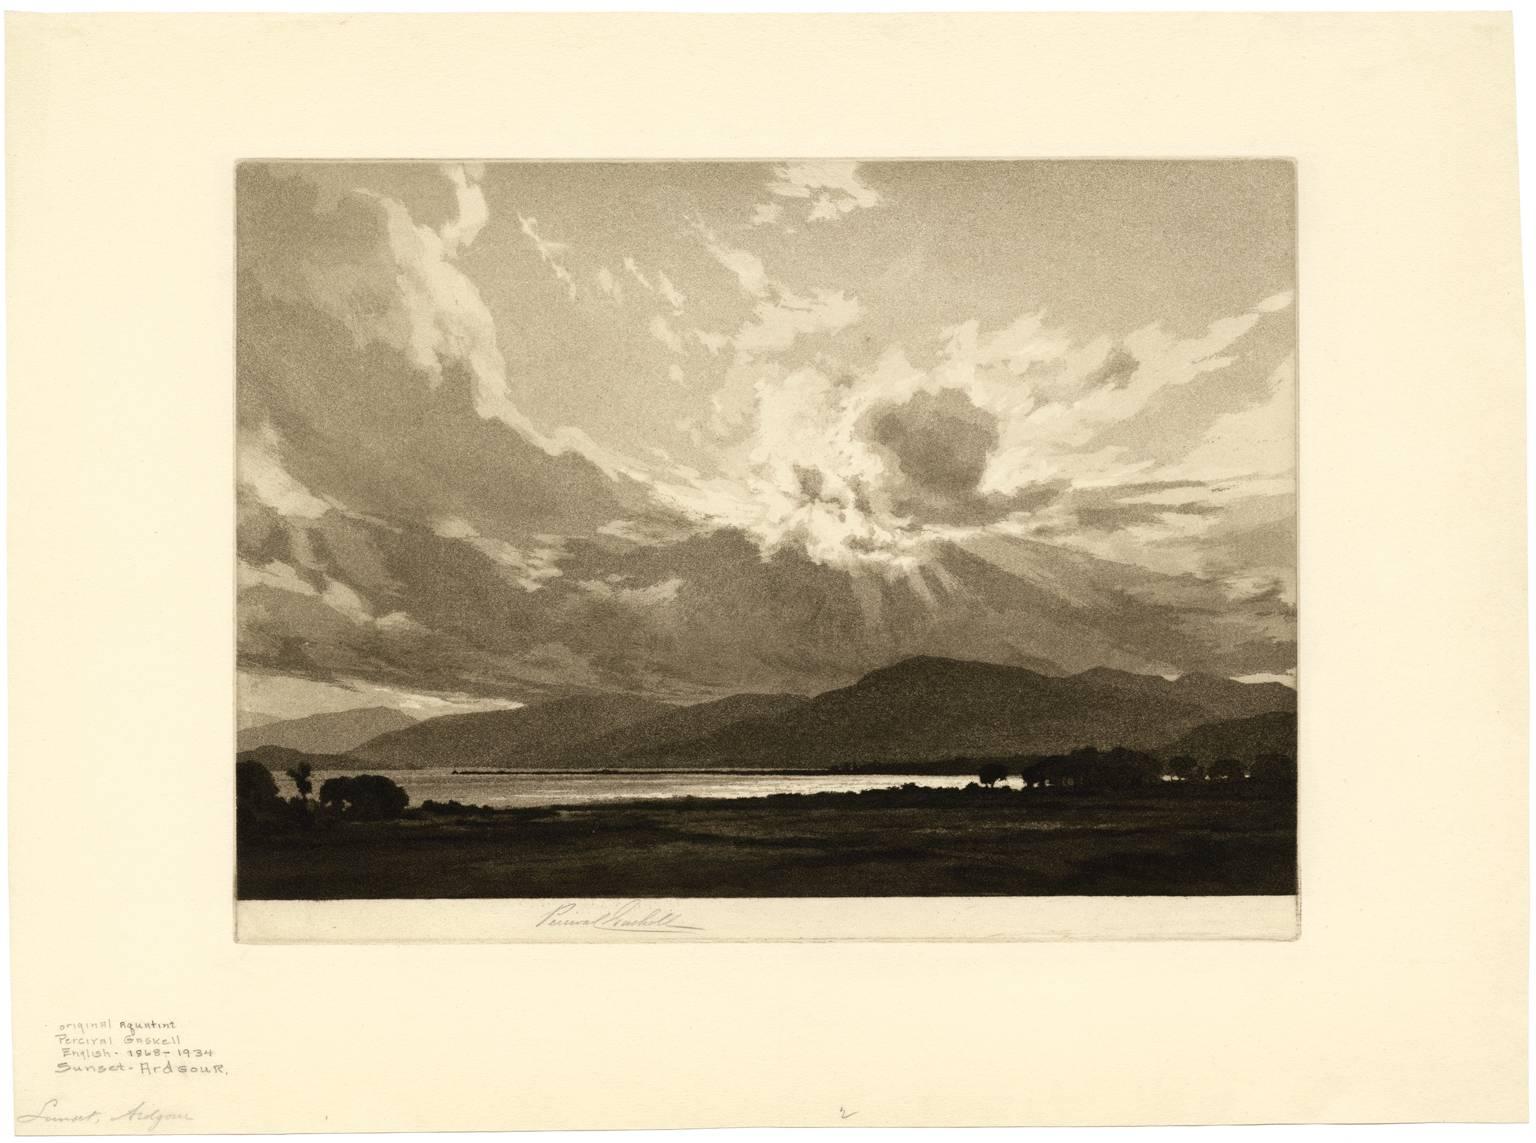 Sunset - Ardgour - Print by Percival Gaskell, R.E.